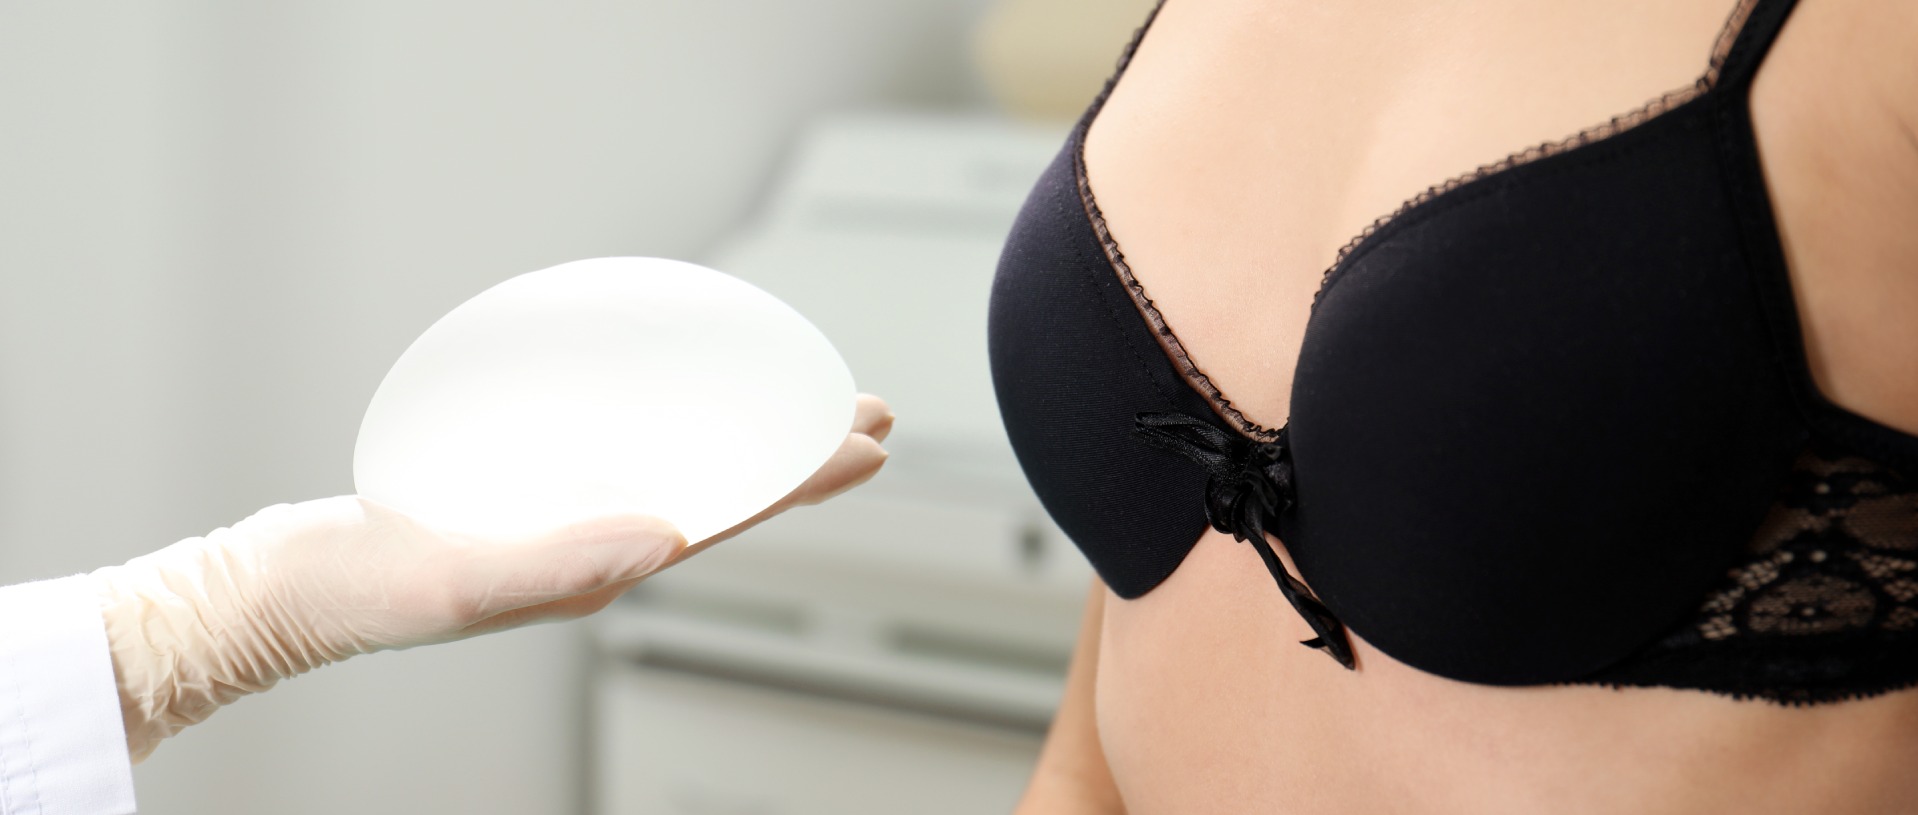 doctor showing silicone implant for breast augmentation to patient